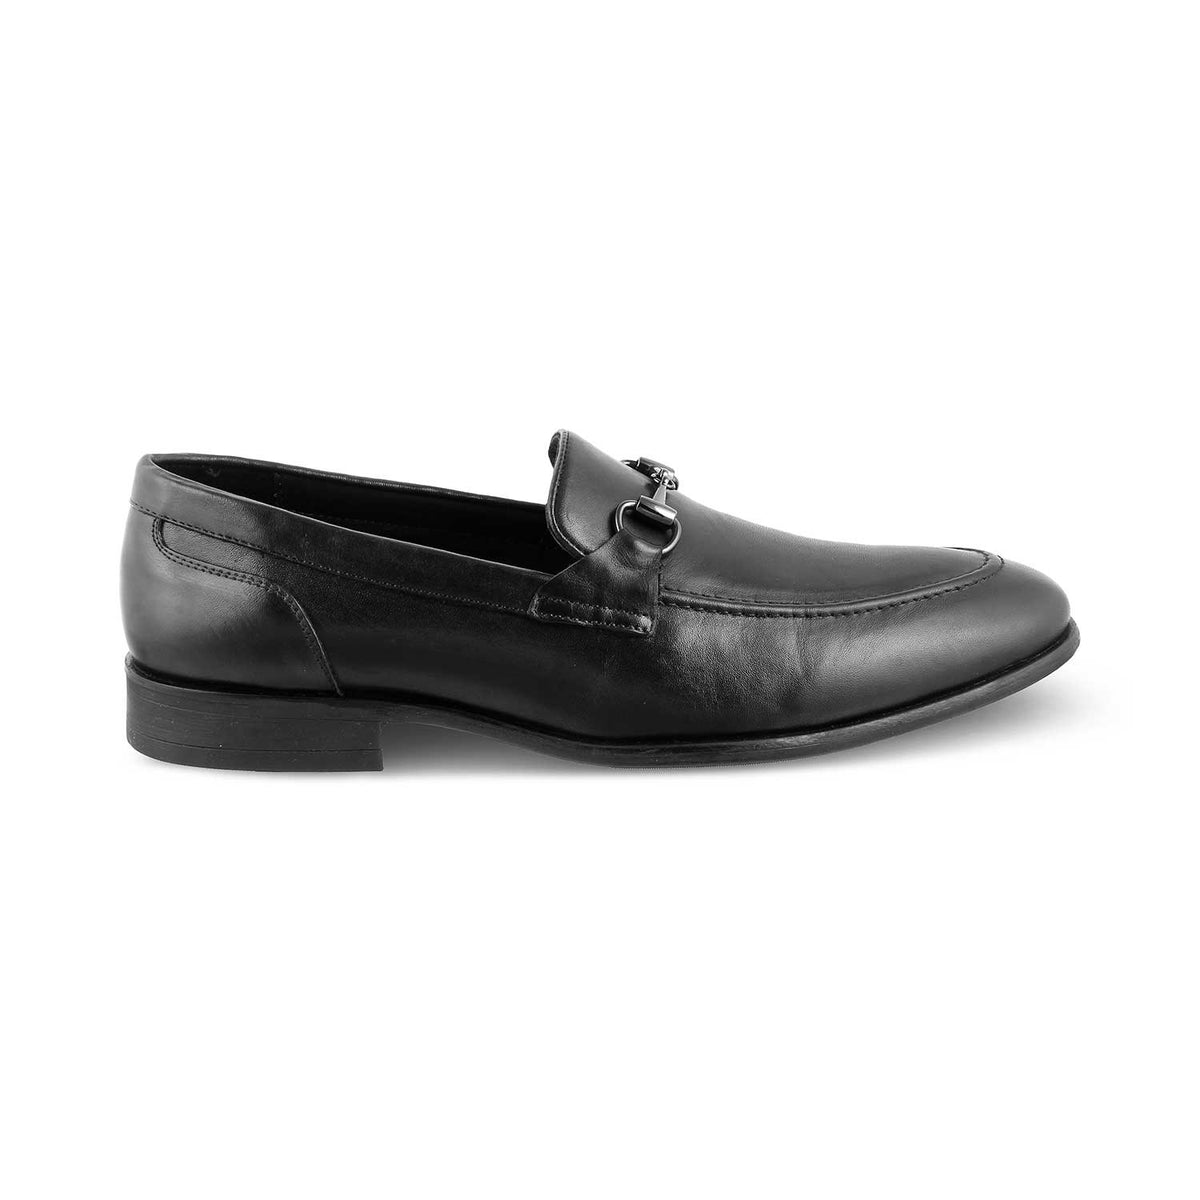 Tresmode-The Pierre Black Men's Leather Horse-Bit Loafers Tresmode-Tresmode